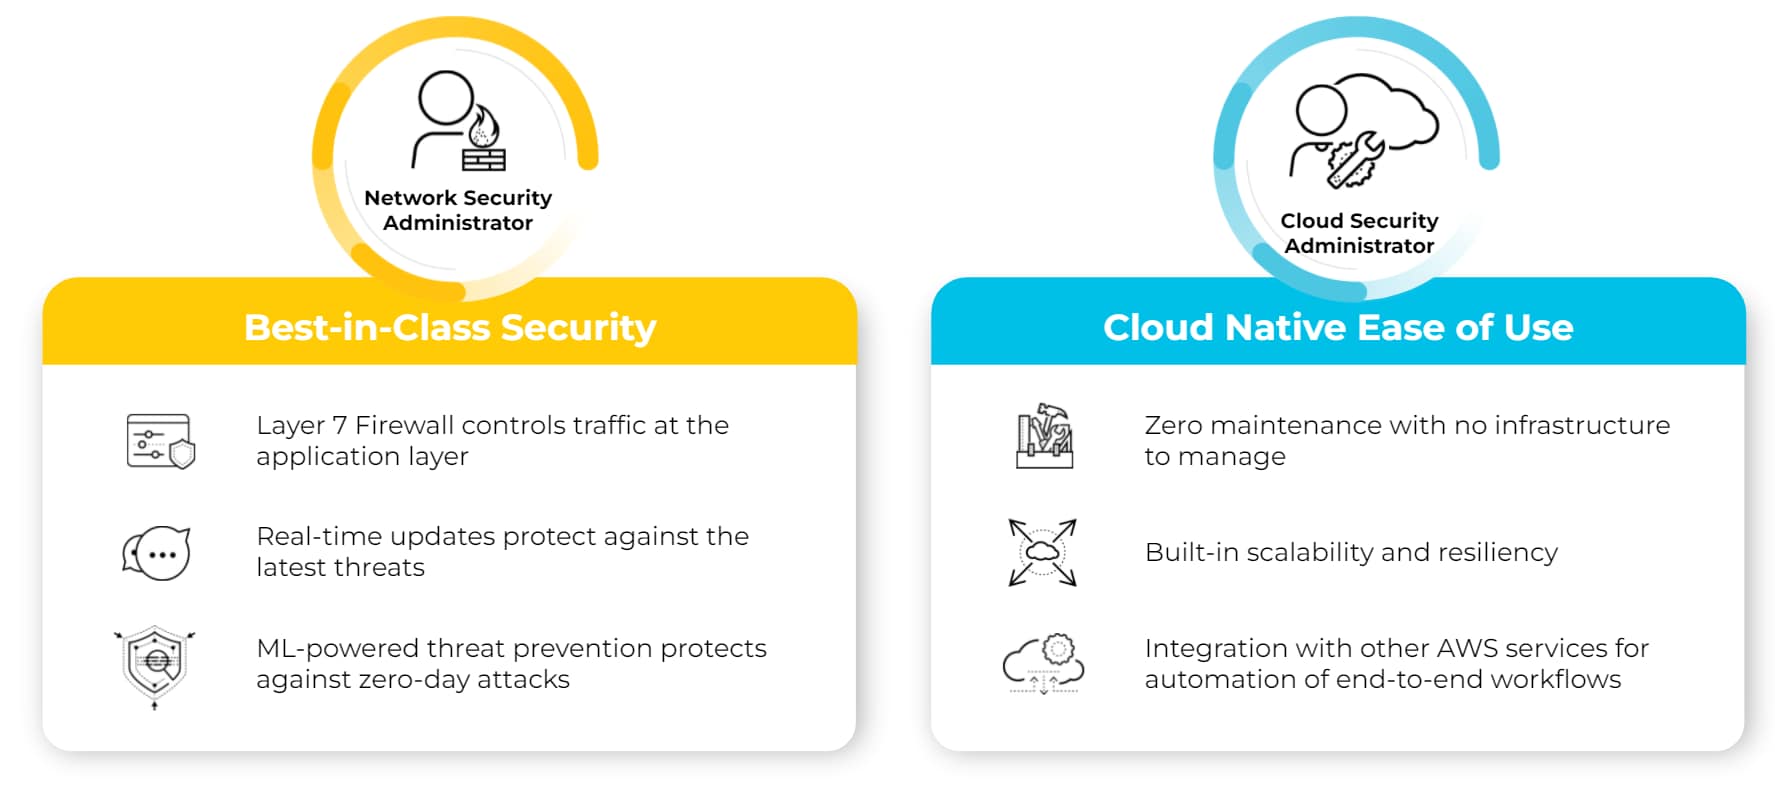 Best-in-class security versus cloud native ease of use